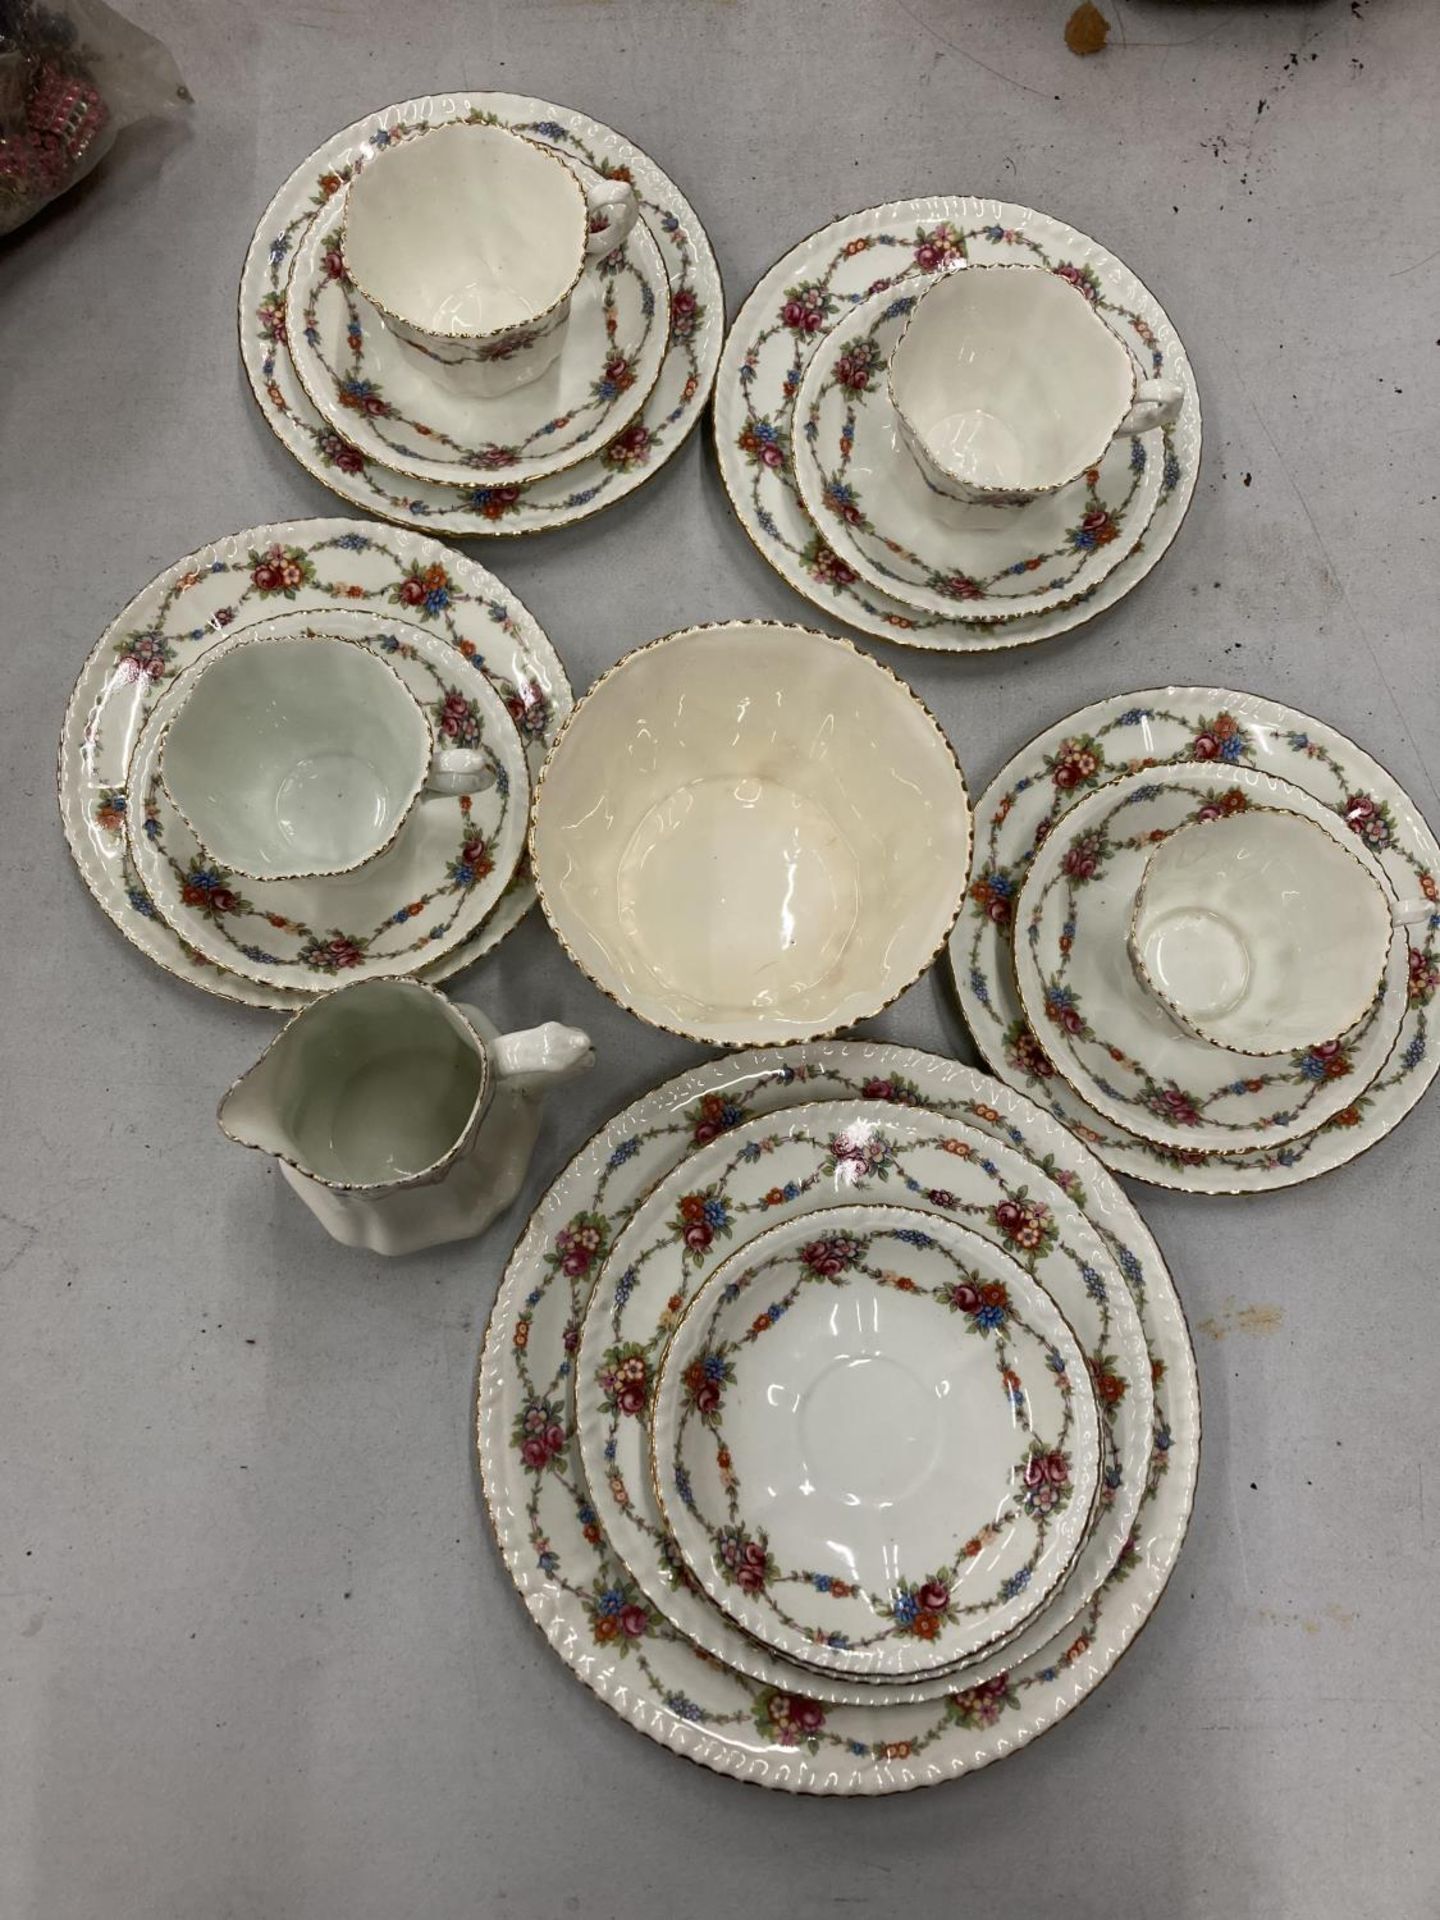 AN ANTIQUE CHINA PART TEASET TO INCLUDE A CAKE PLATE, SUGAR BOWL, CREAM JUG, CUPS, SAUCERS AND - Image 2 of 3